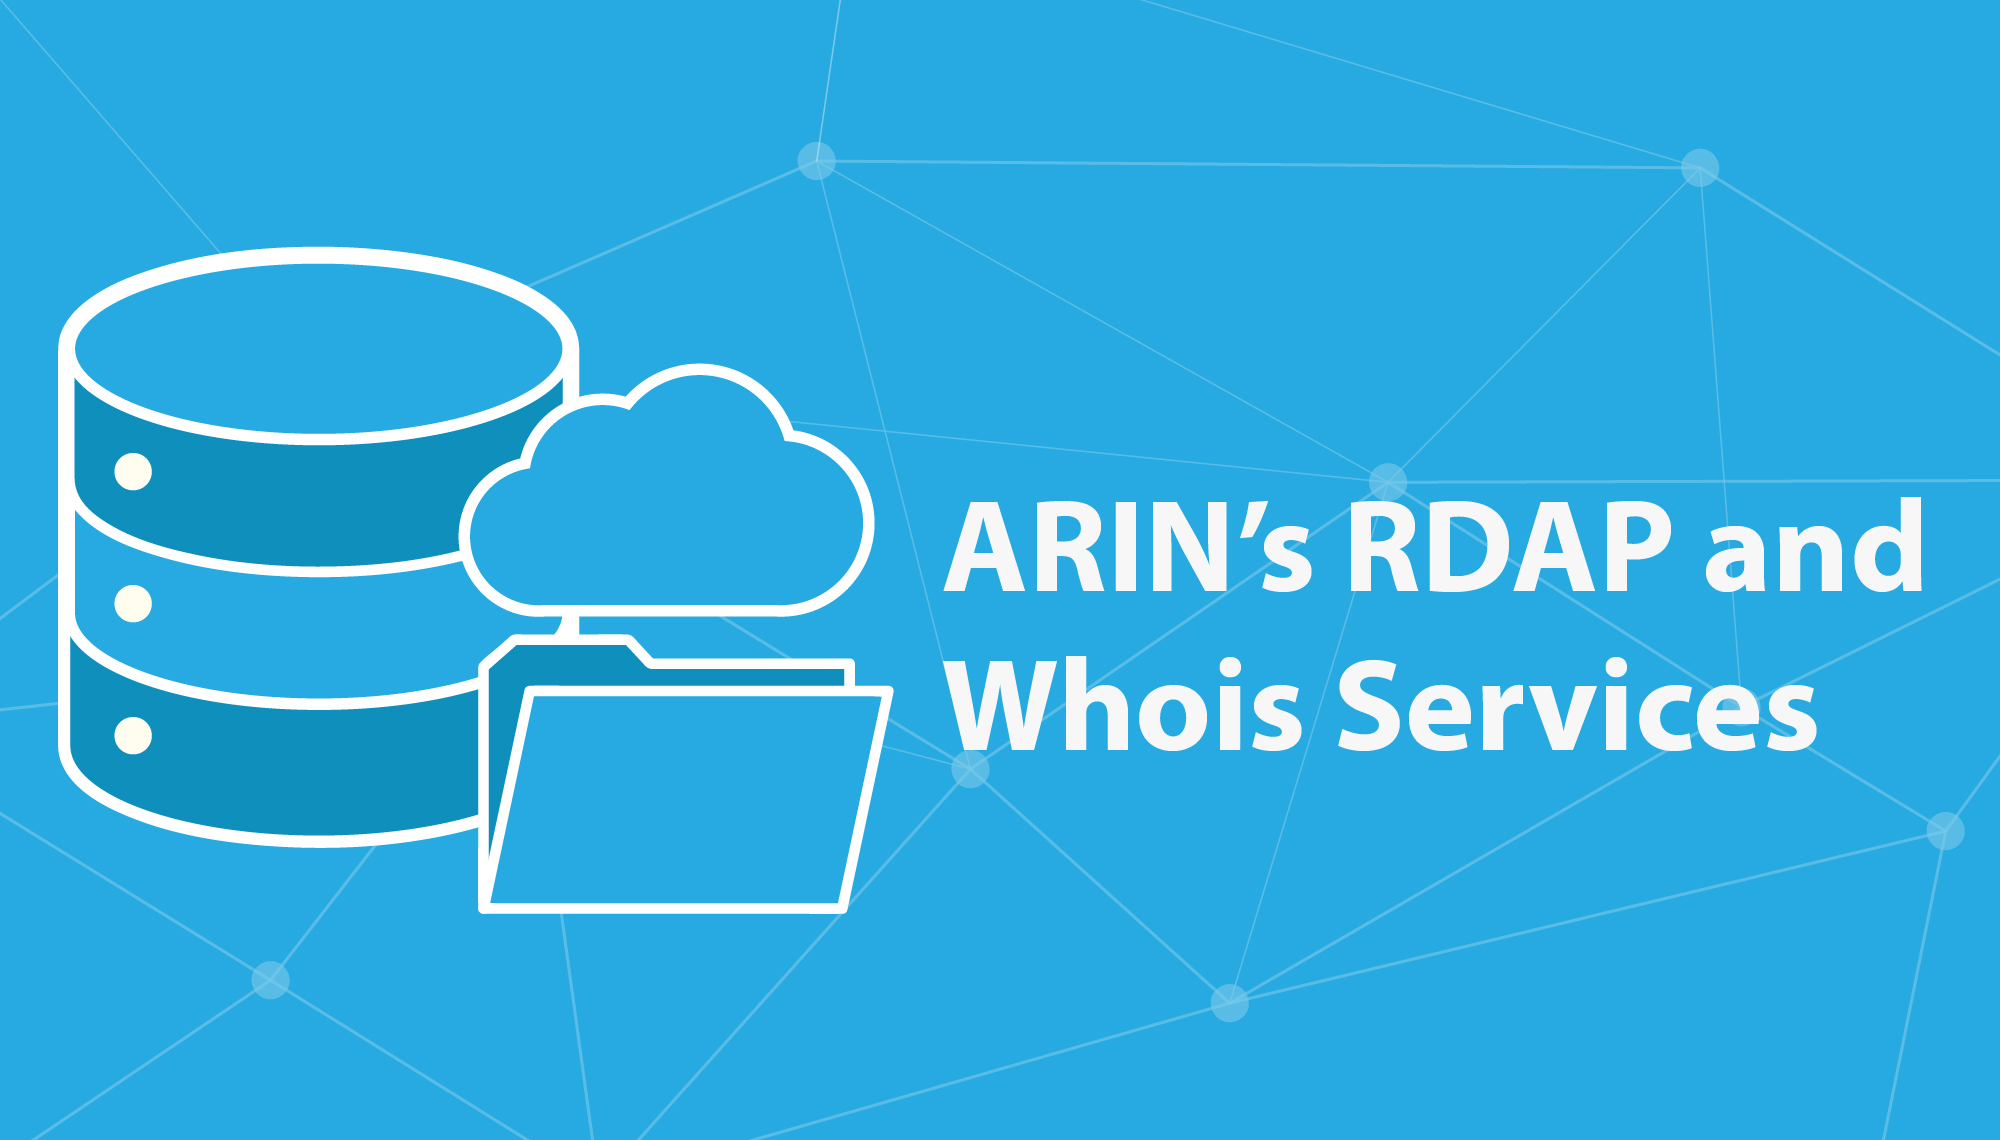 ARIN’s RDAP and Whois Services: Getting the Information You Need